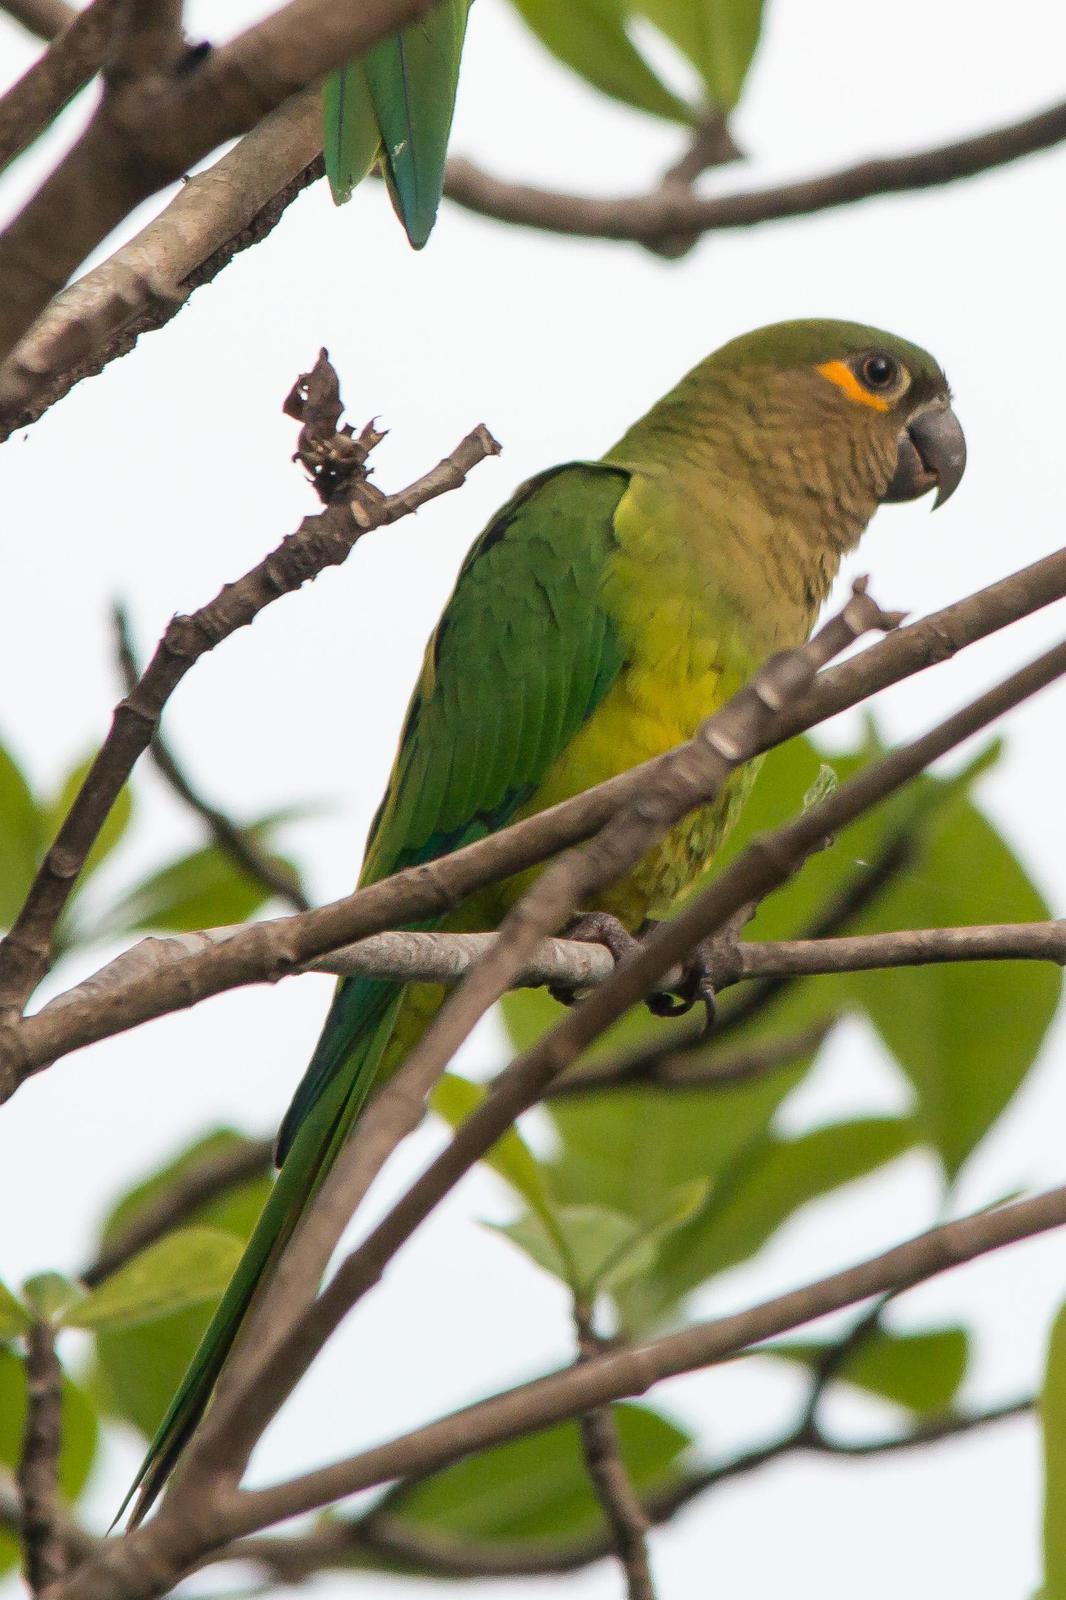 Brown-throated Parakeet Photo by Marie-France Rivard